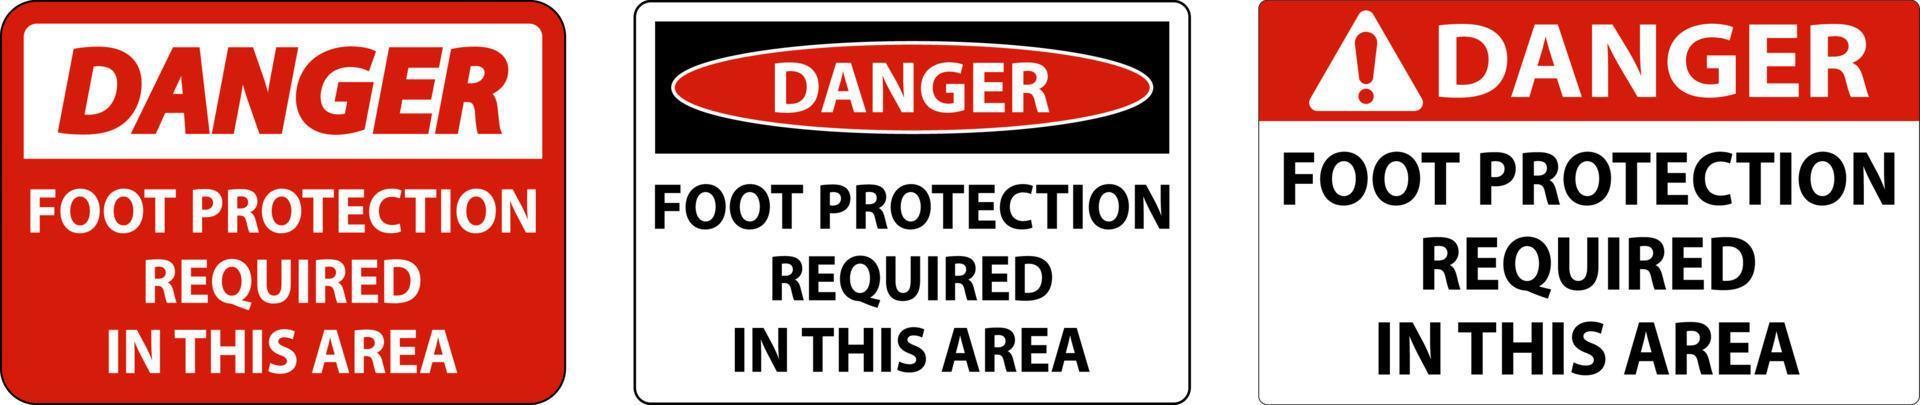 Danger Foot Protection Required in This area Sign vector